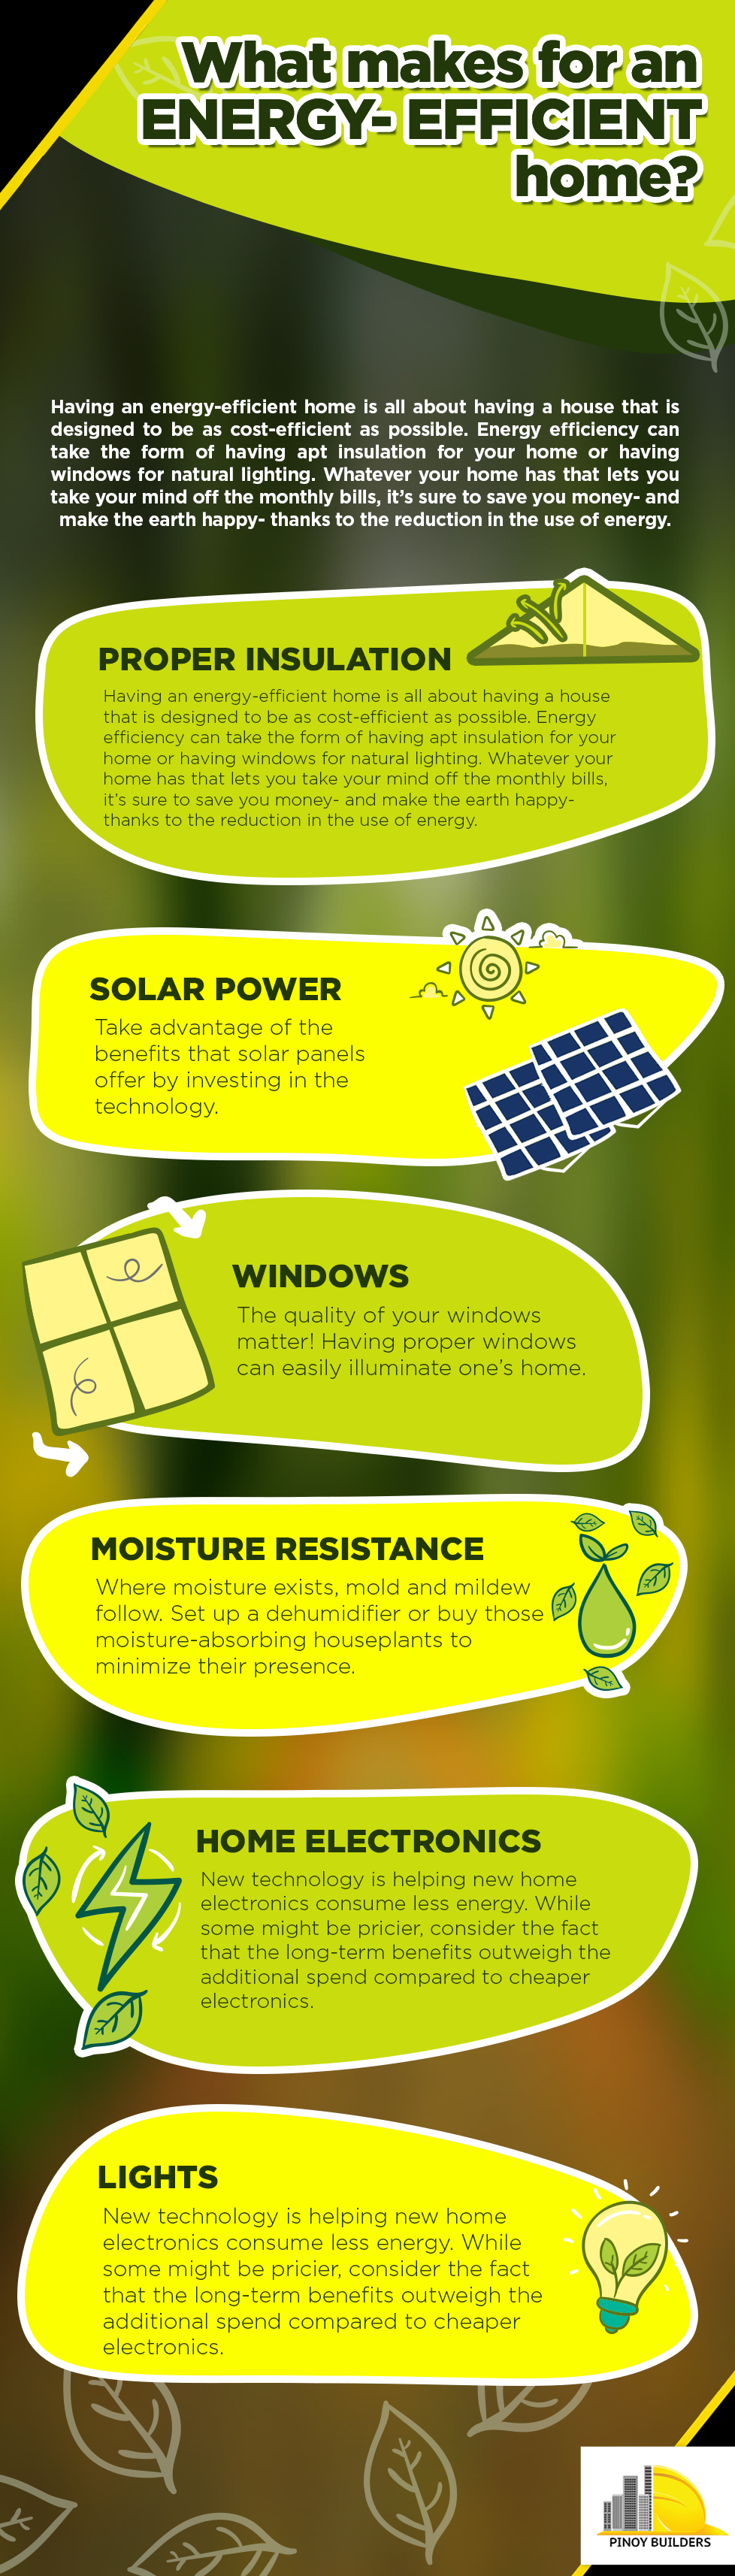 Infographics -What makes for an energy-efficient home (1).jpg